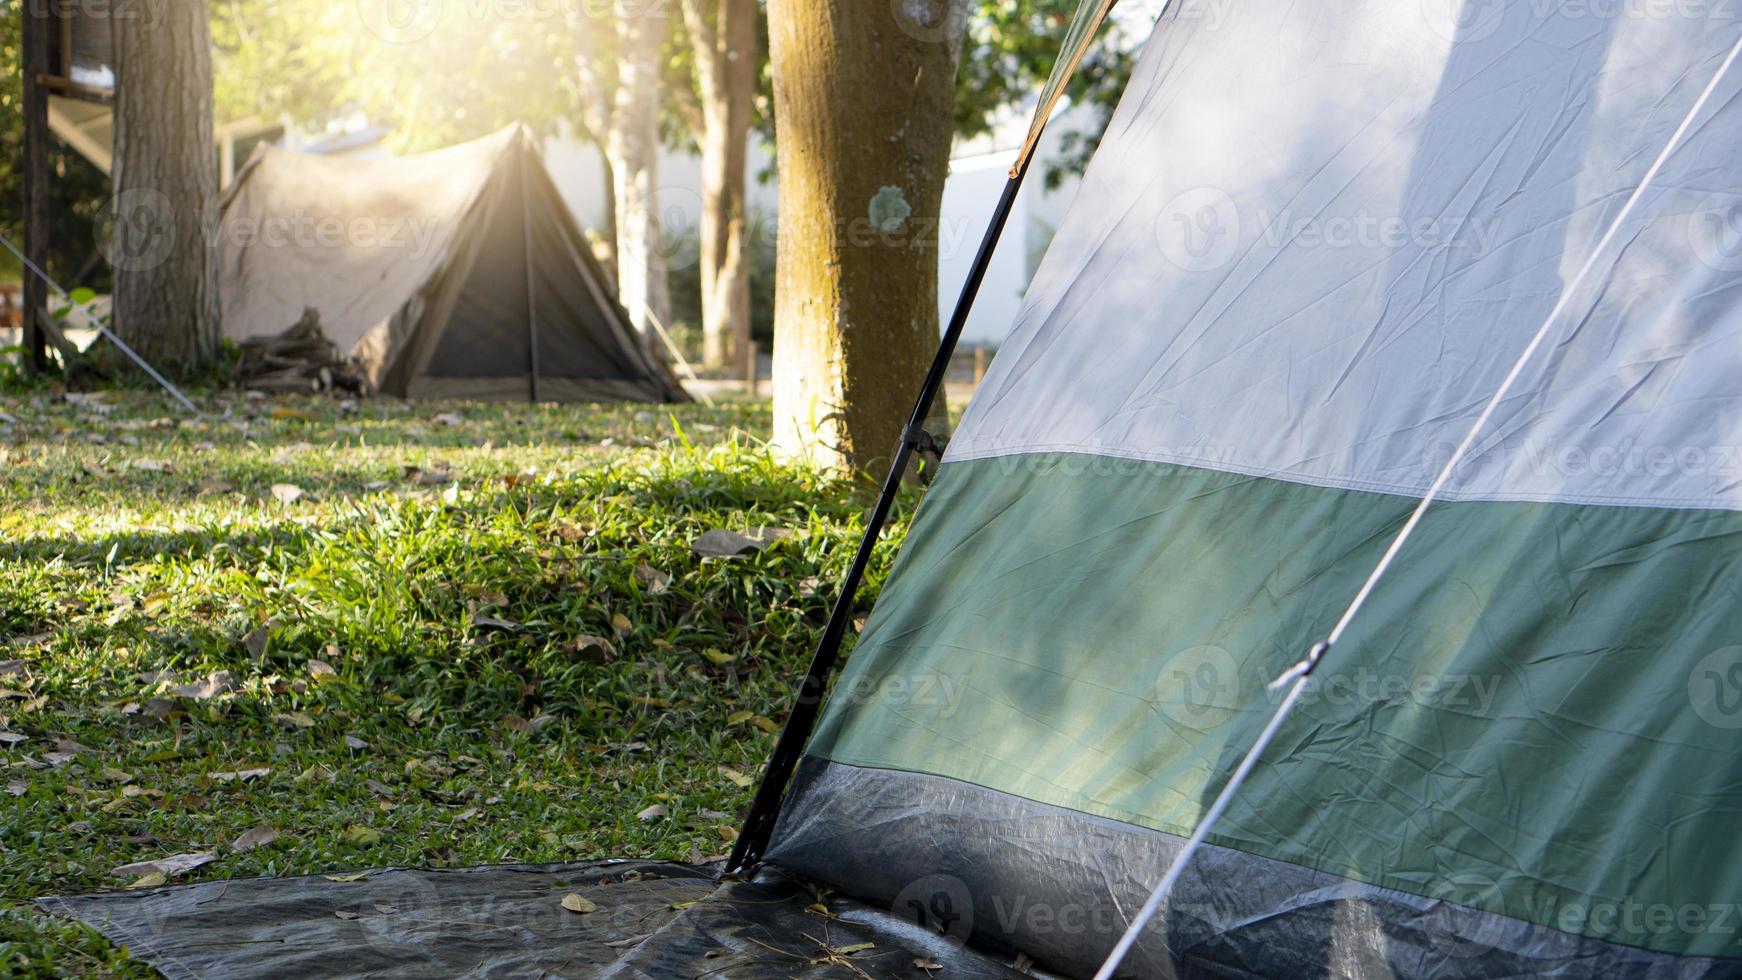 A corner of a green tent spread out on a black canvas under the shade of a big tree. Background were lawns and other tents in the distance under the morning light. photo